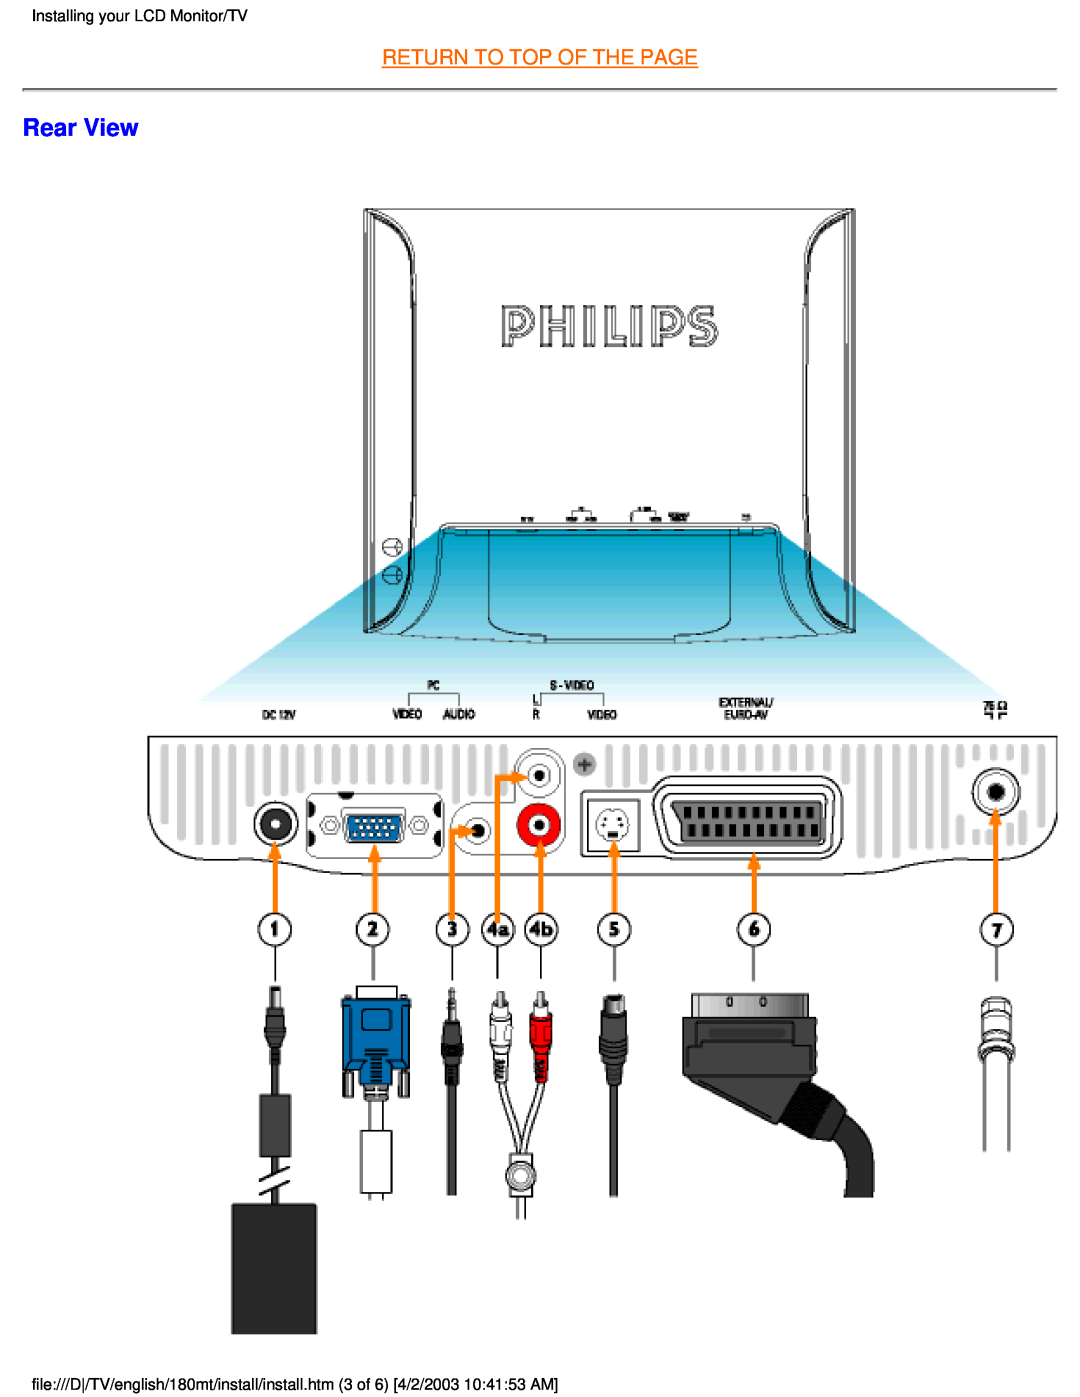 Philips 180MT manual Rear View, Return To Top Of The Page, Installing your LCD Monitor/TV 